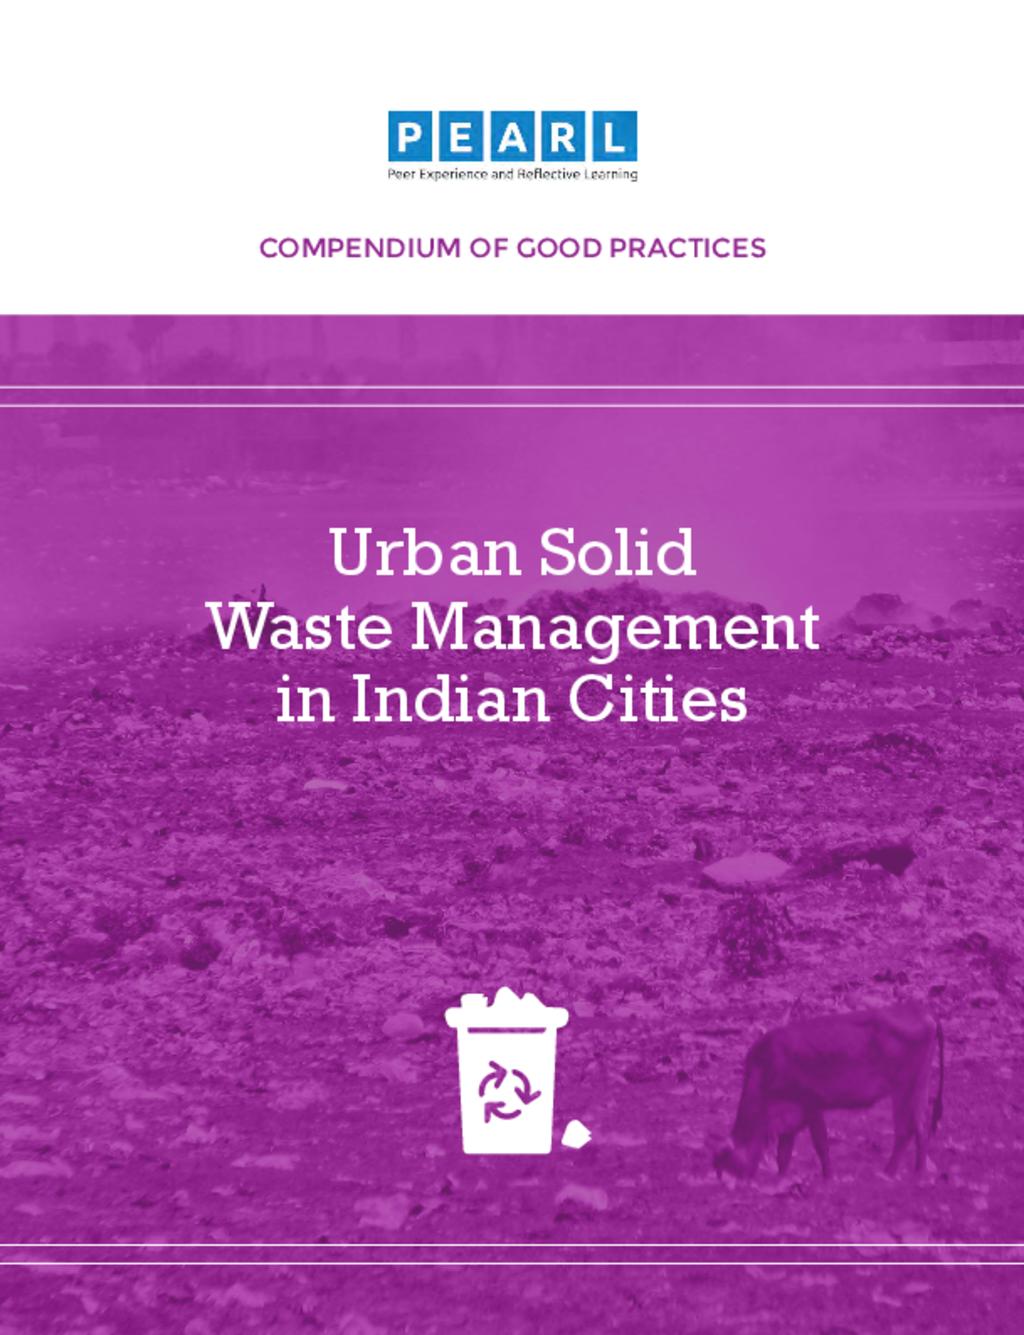 Urban Solid Waste Management in Indian Cities